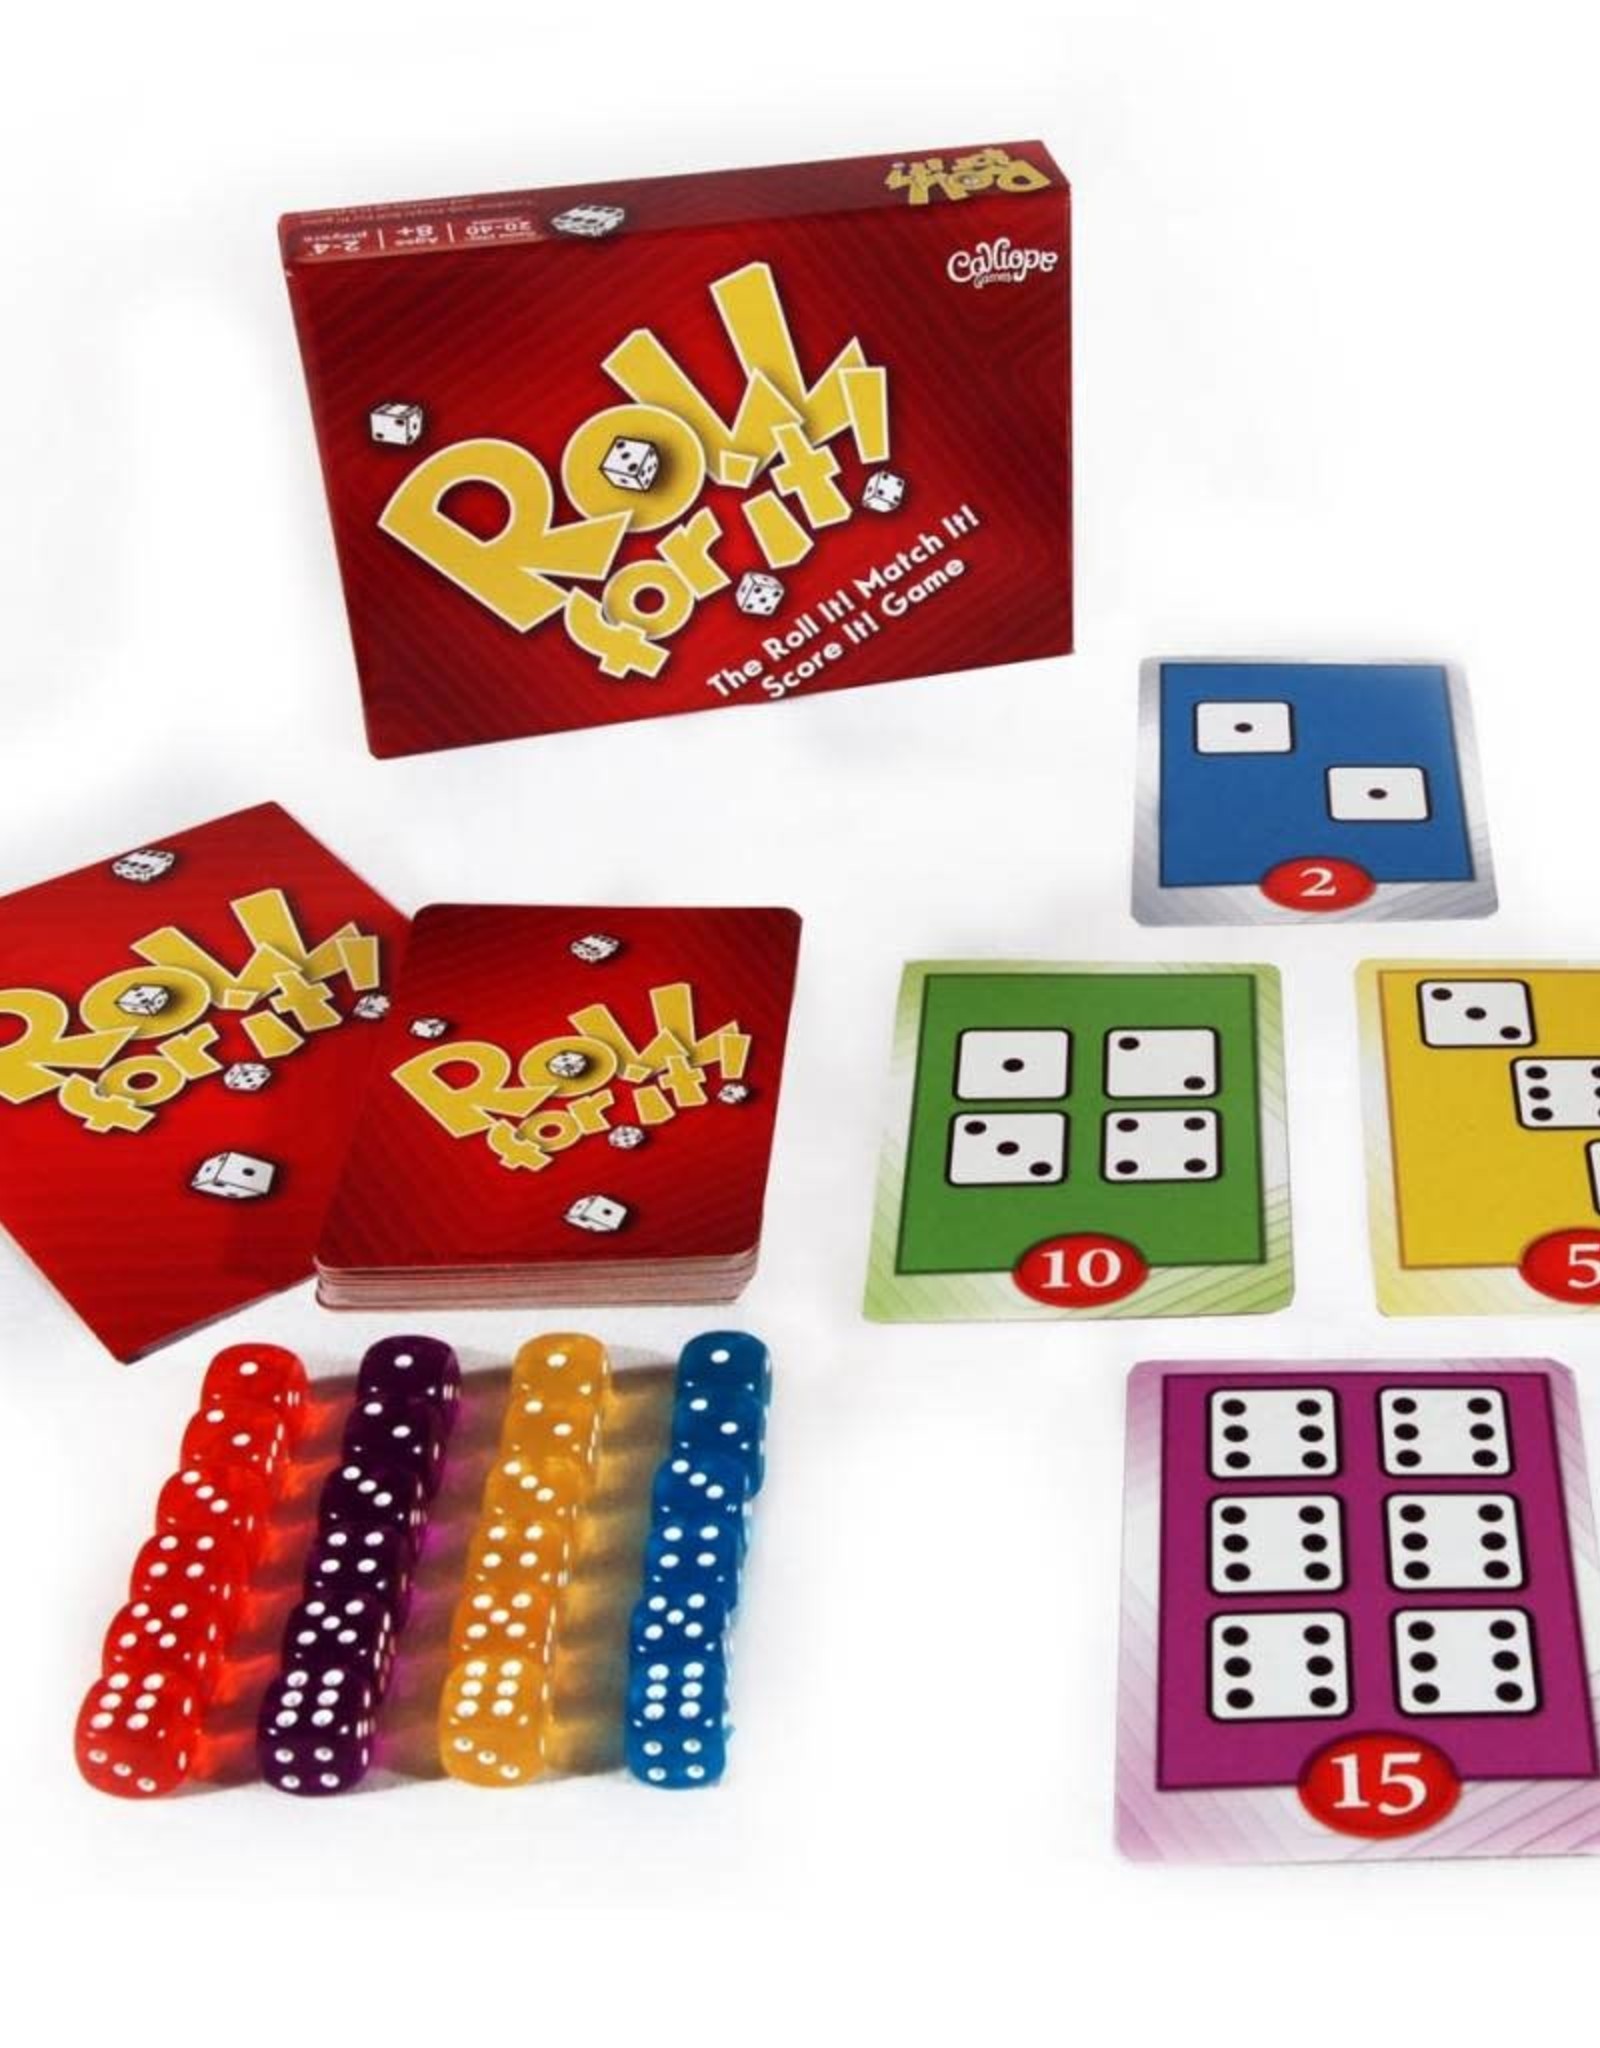 Calliope Games Roll For It! Core Set 1 - Red Edition